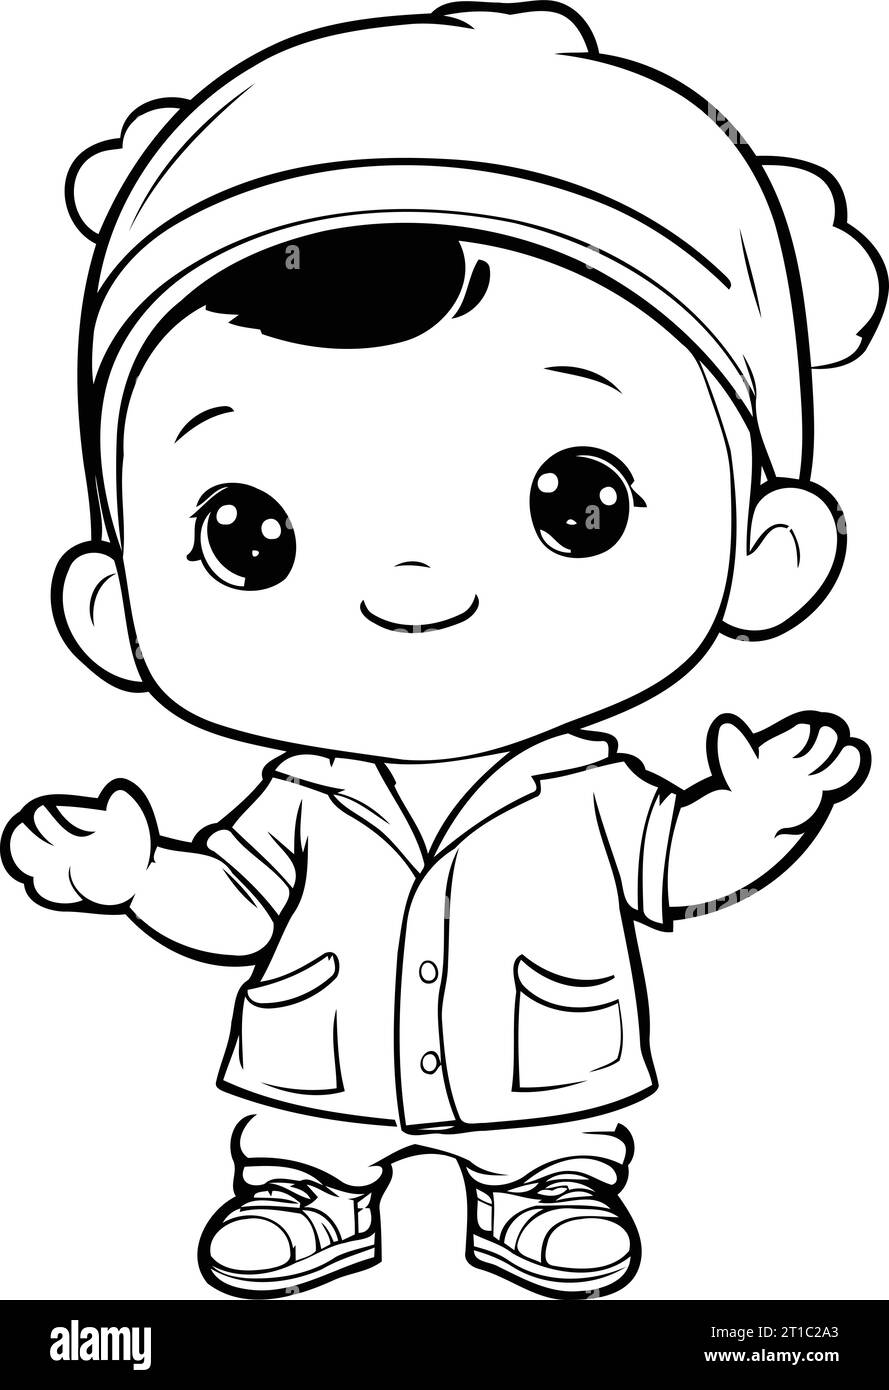 Cute cartoon baby boy in a cap and overalls. Vector illustration Stock ...